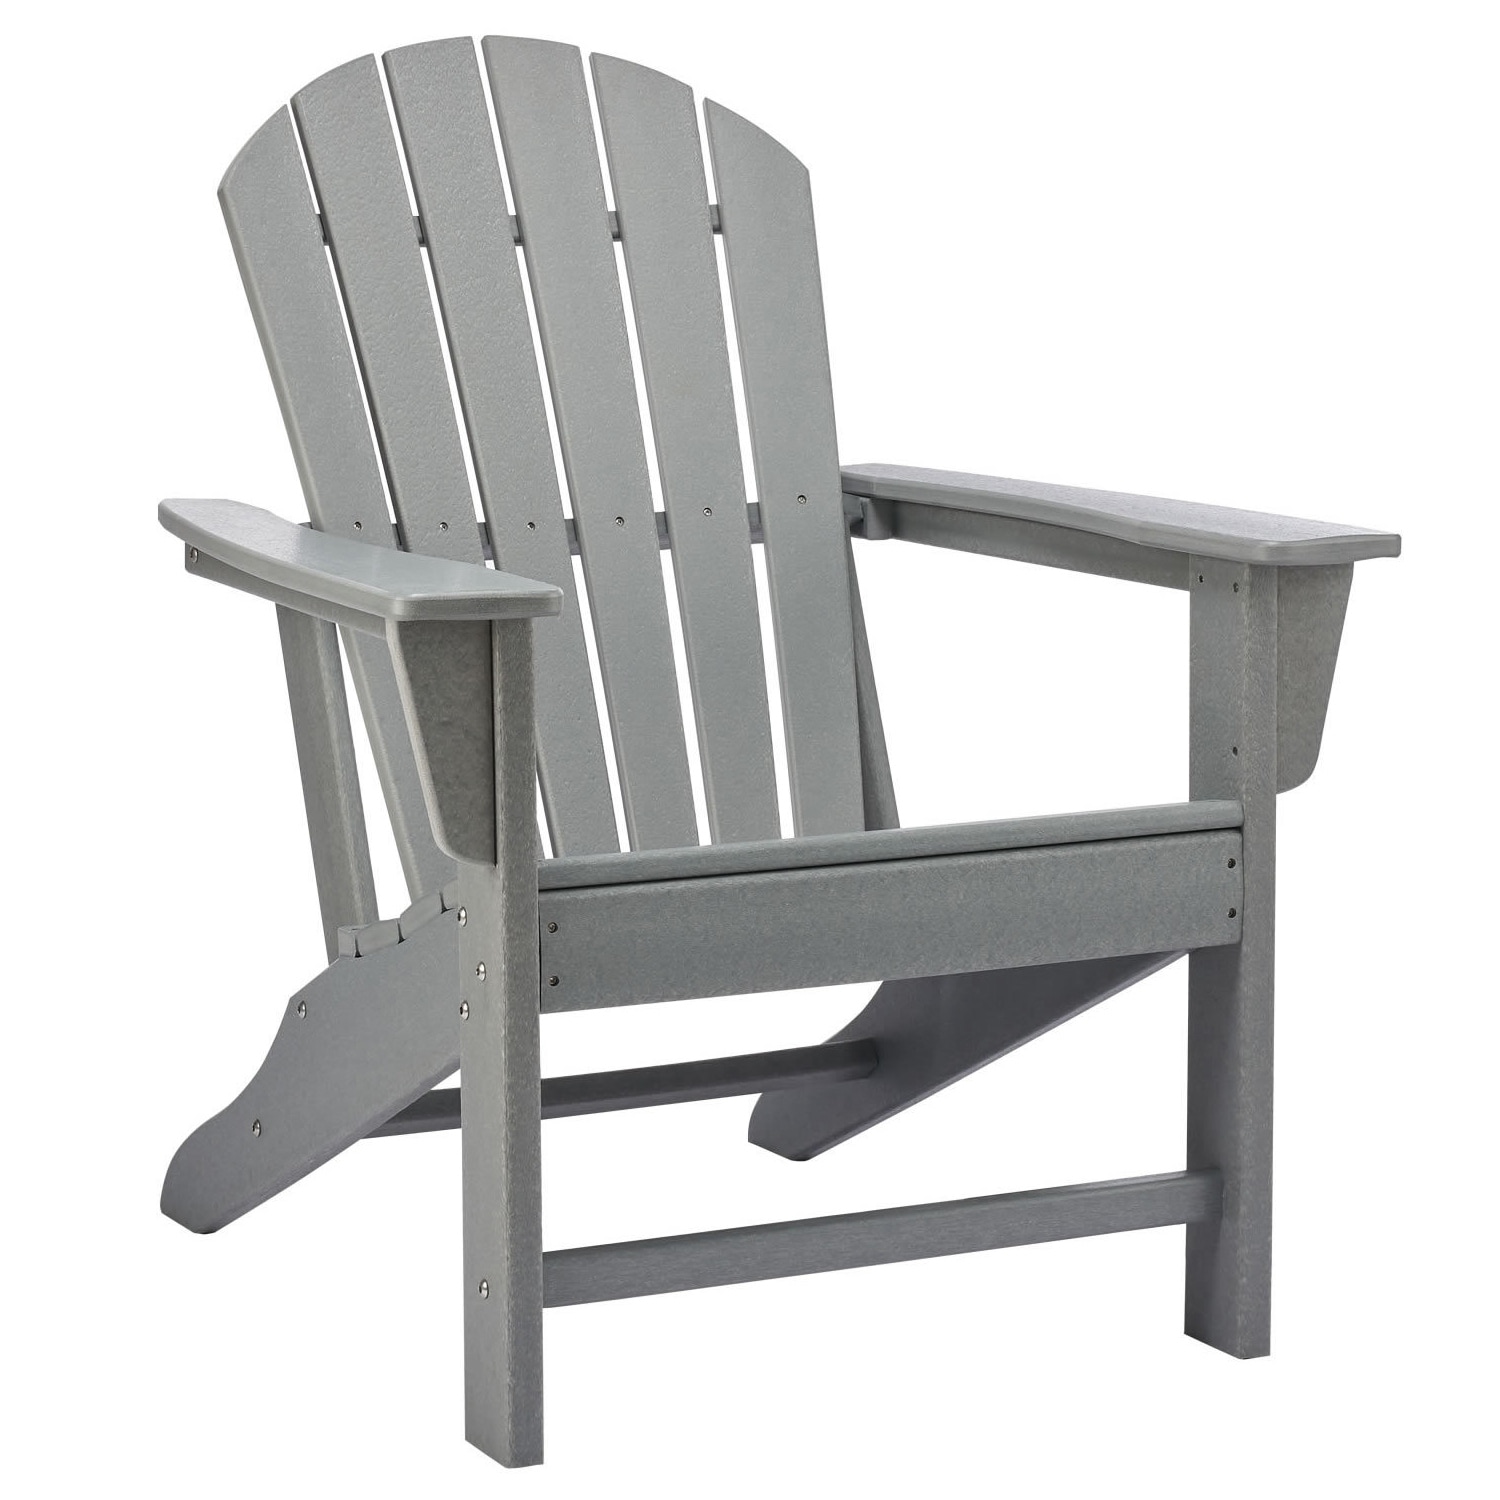 Outdoor Poly Lumber Adirondack Chair Patio Chair Lawn Chair